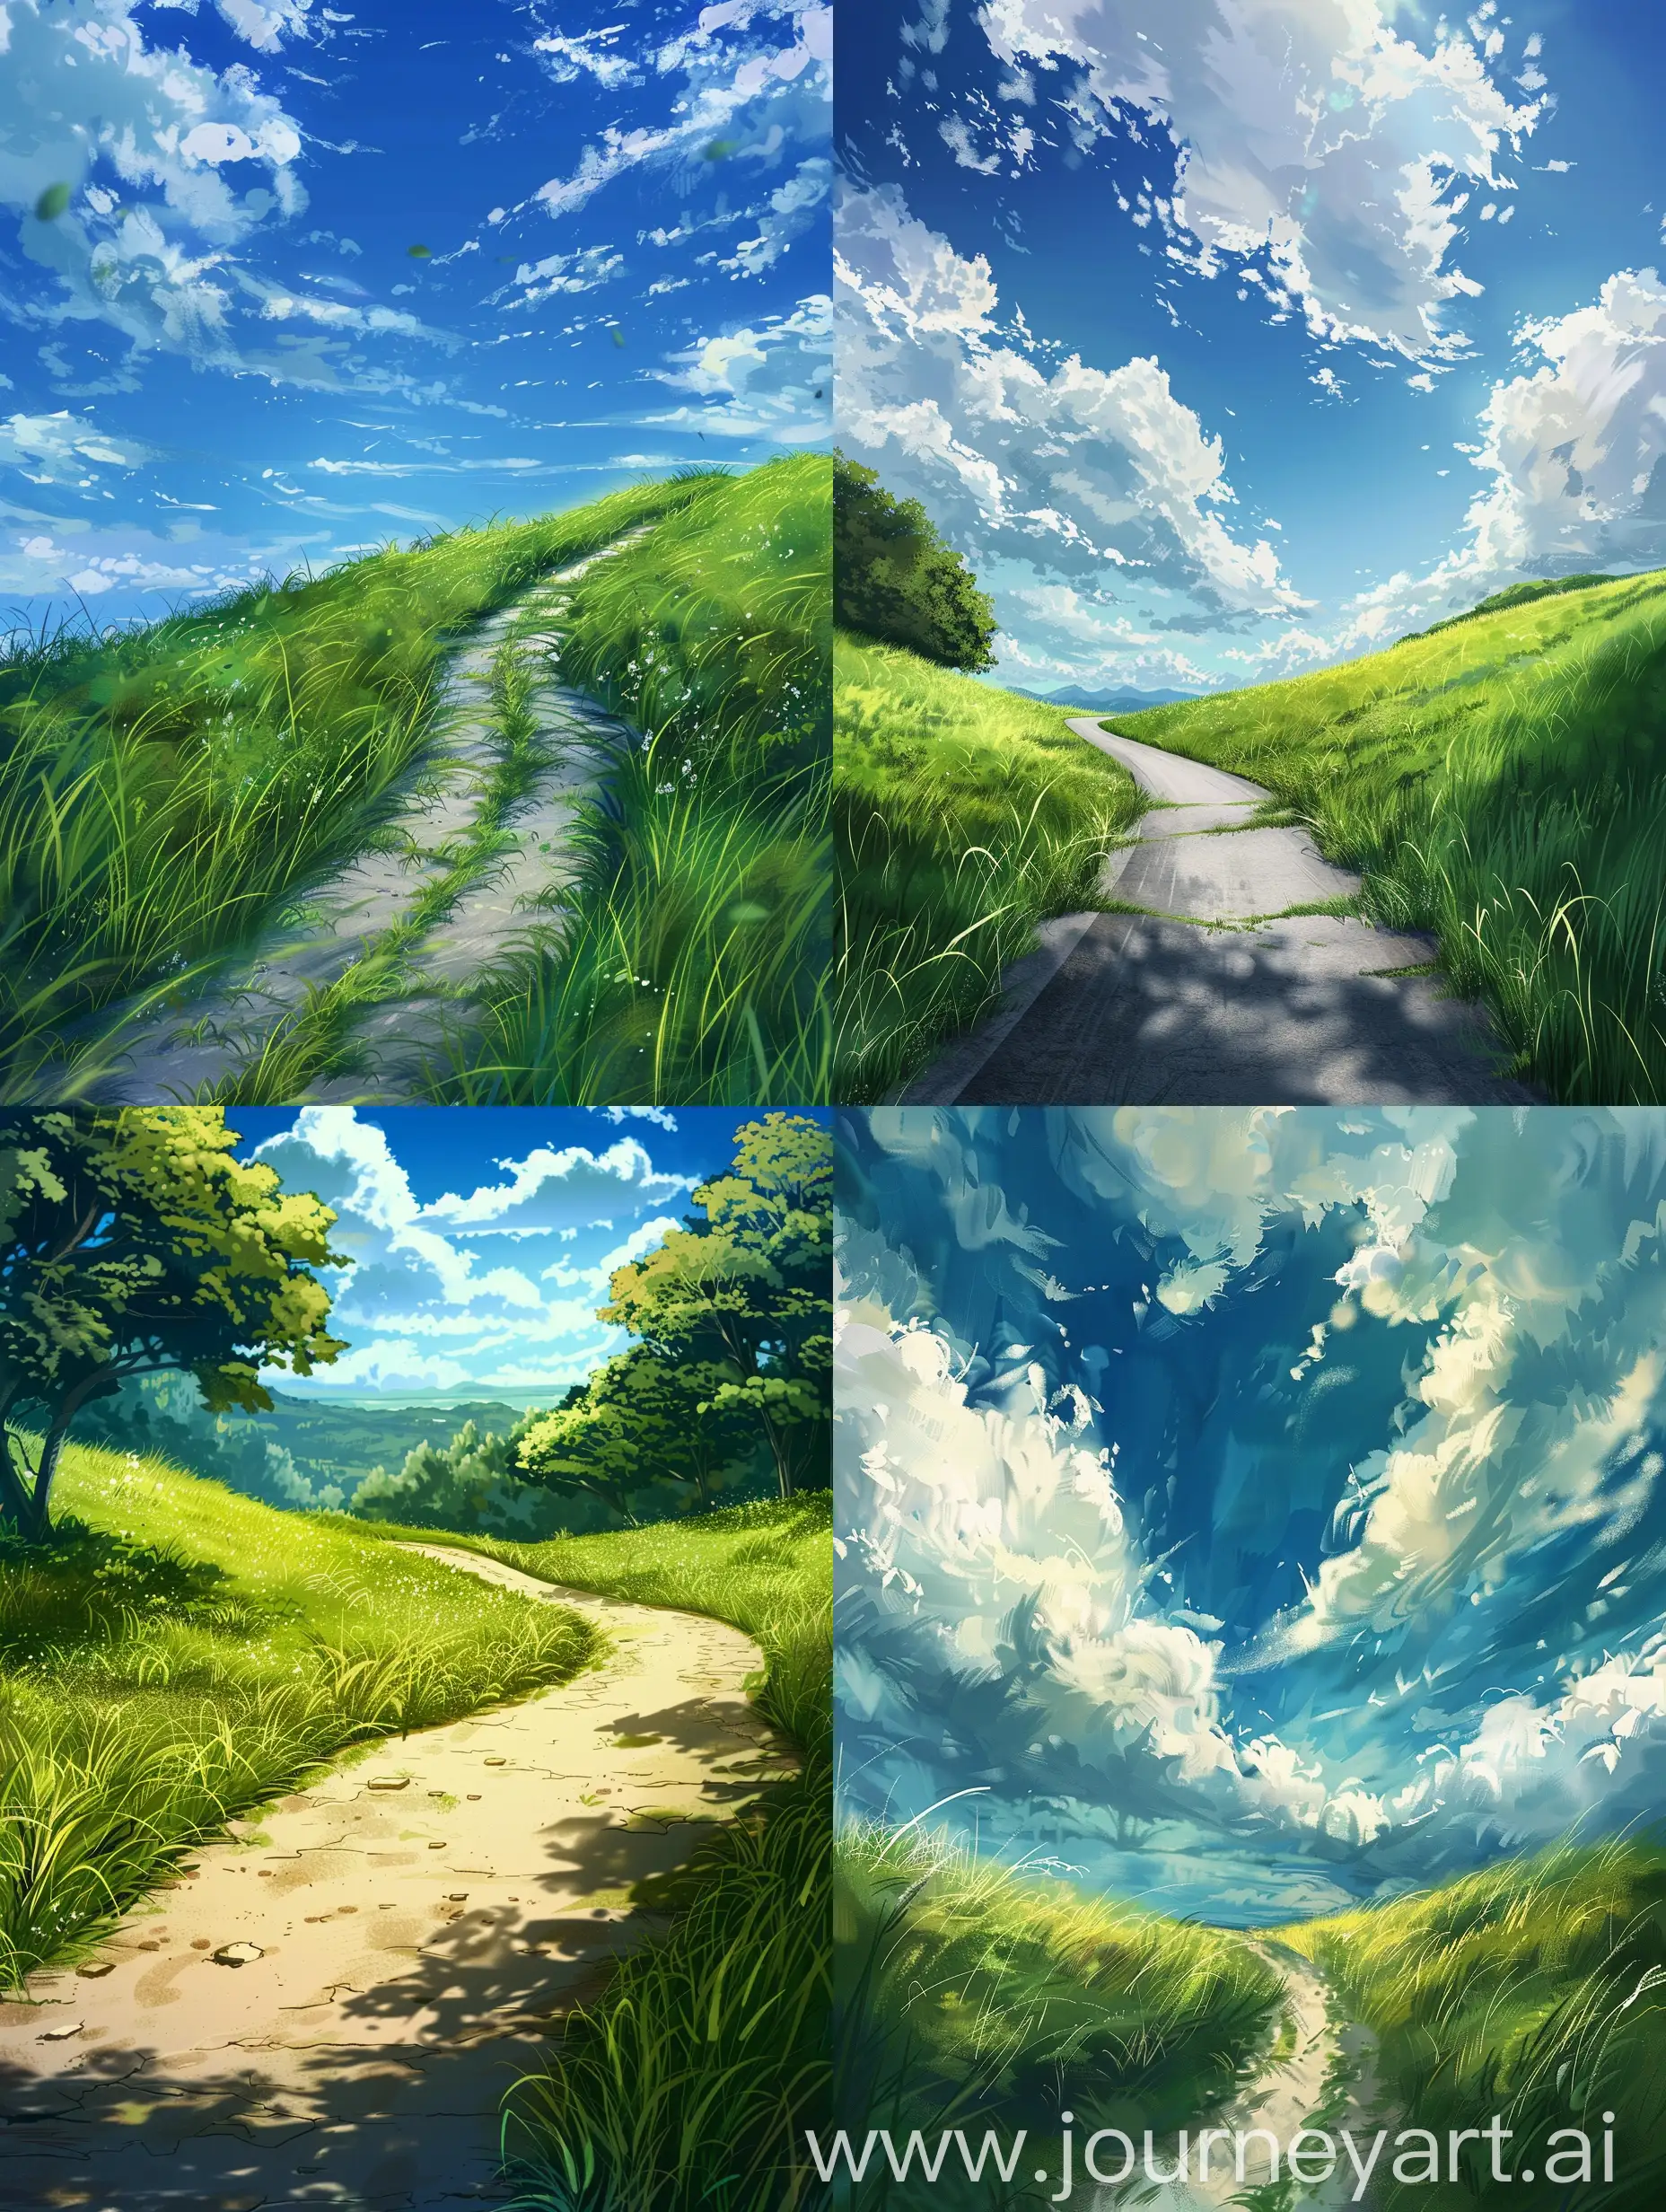 Landscape, fantasy anime style, a road in grass.